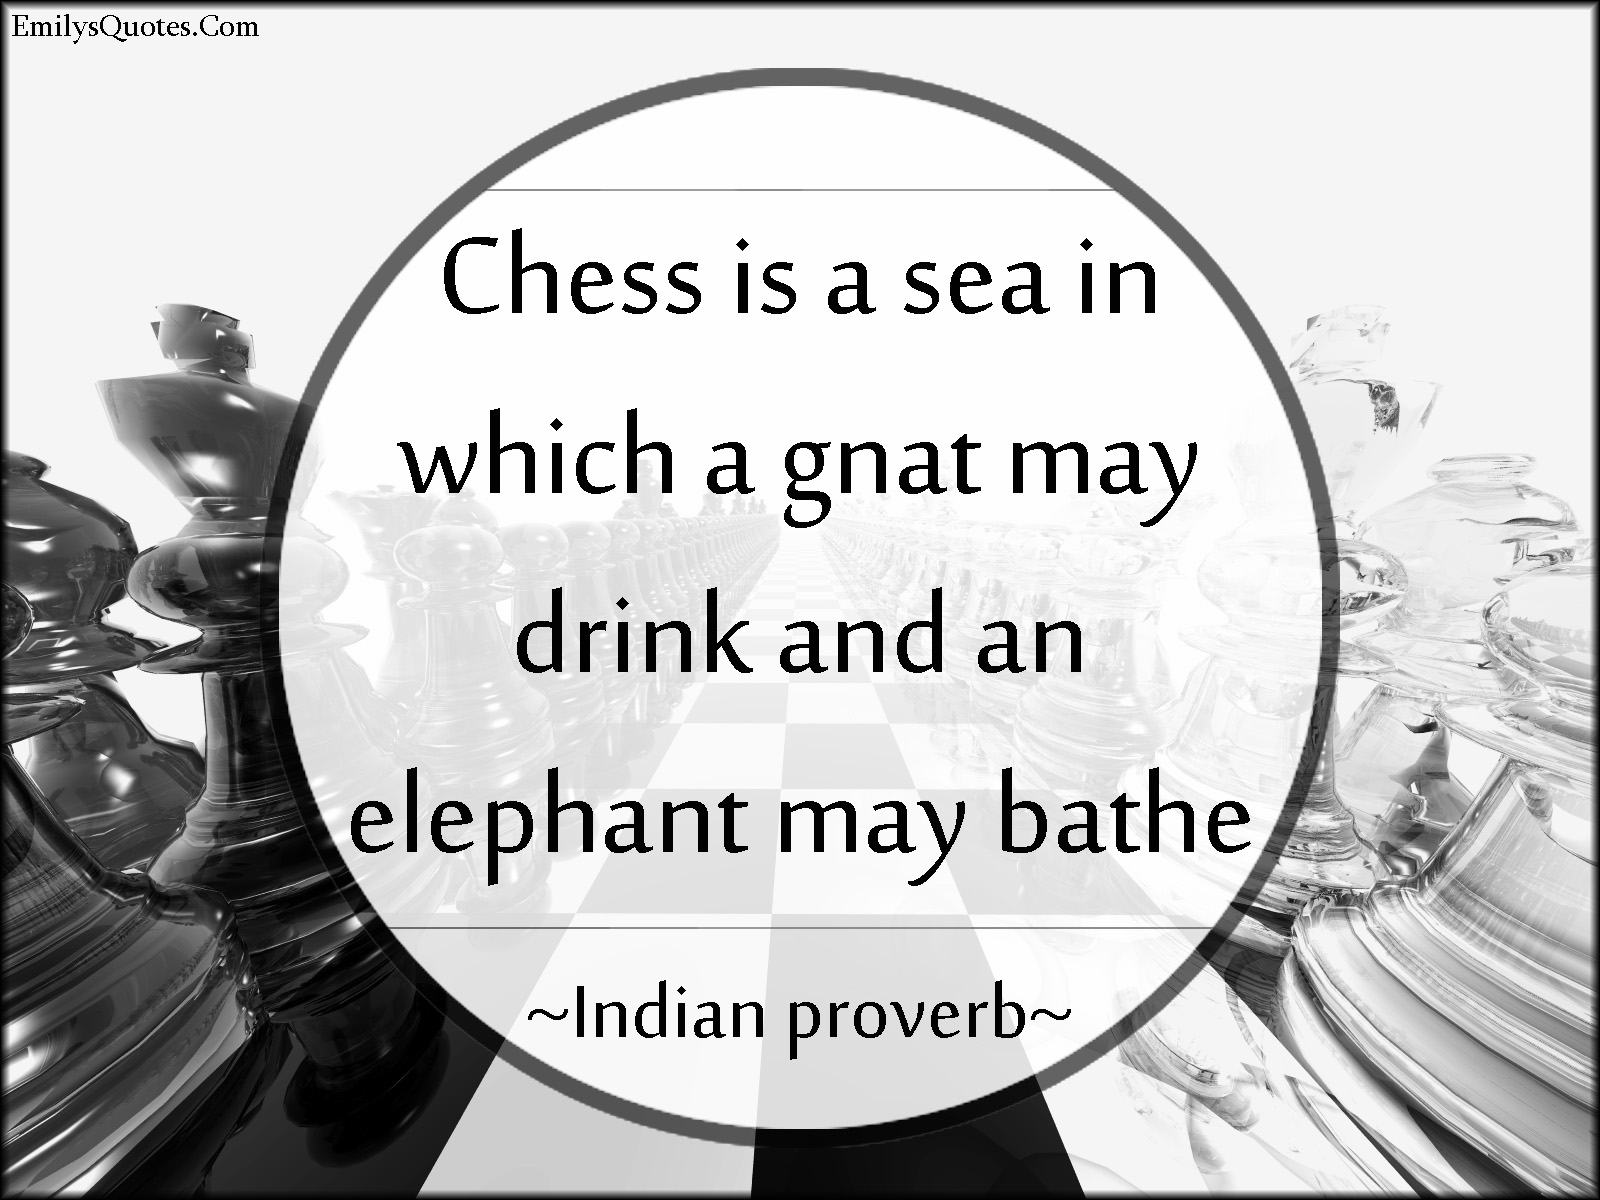 Chess is a sea in which a gnat may drink and an elephant may bathe